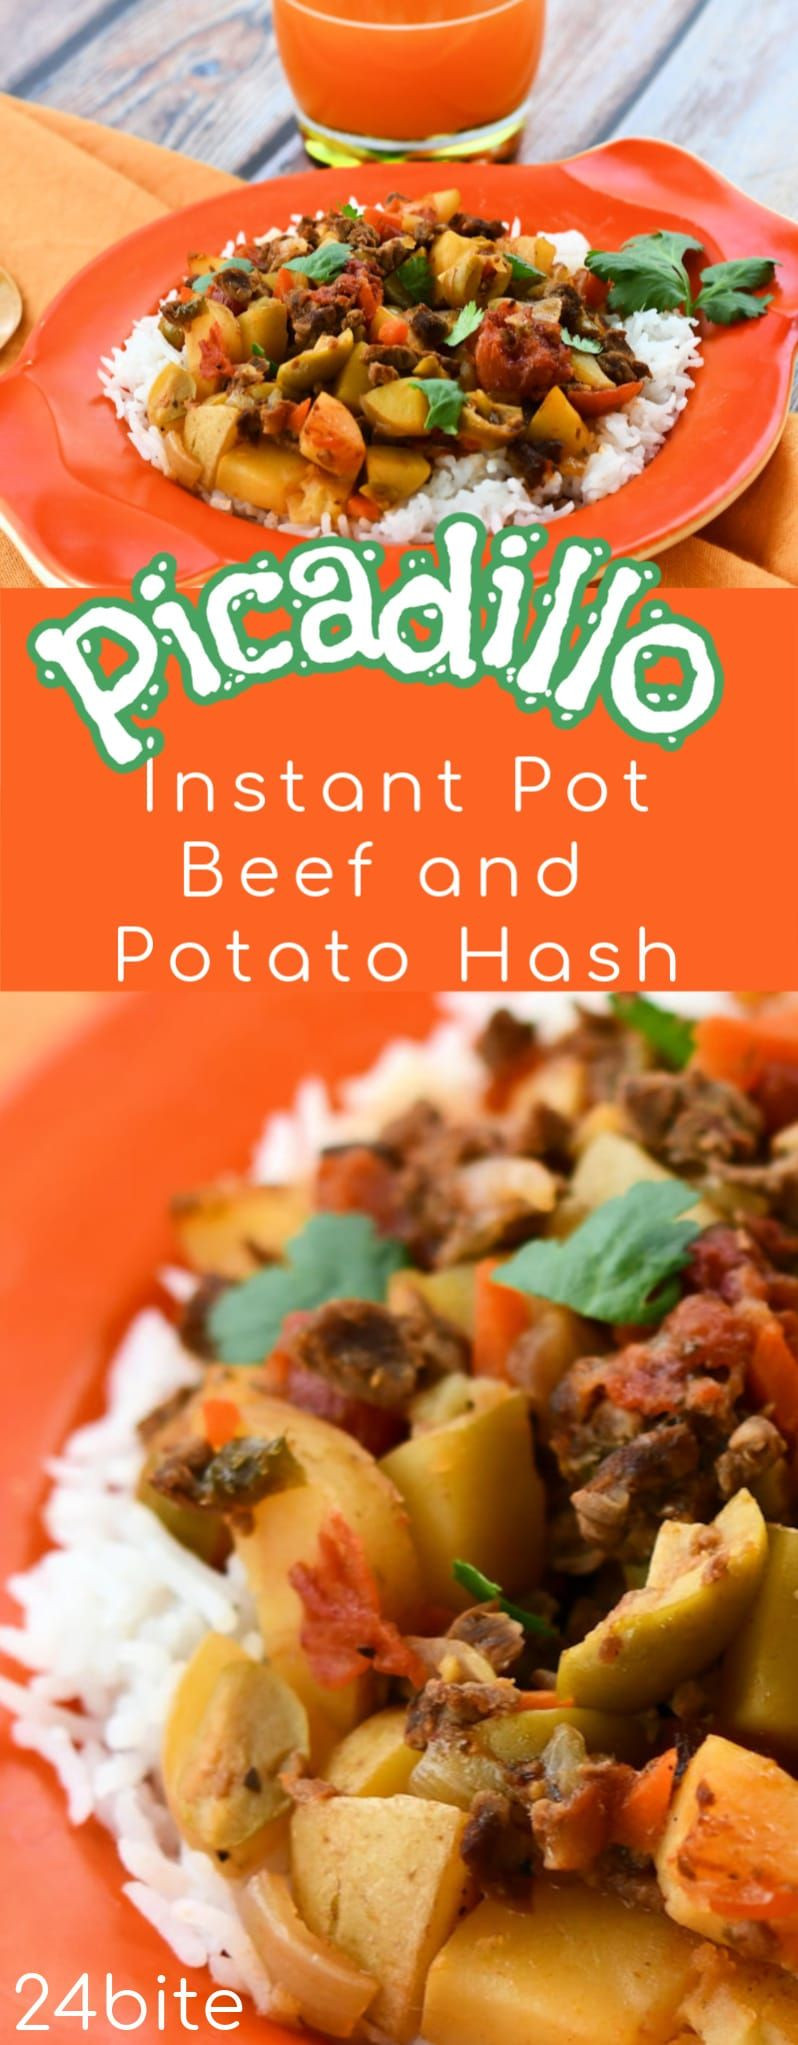 Mexican Ground Beef And Potatoes Recipes
 Instant Pot Mexican Picadillo Recipe